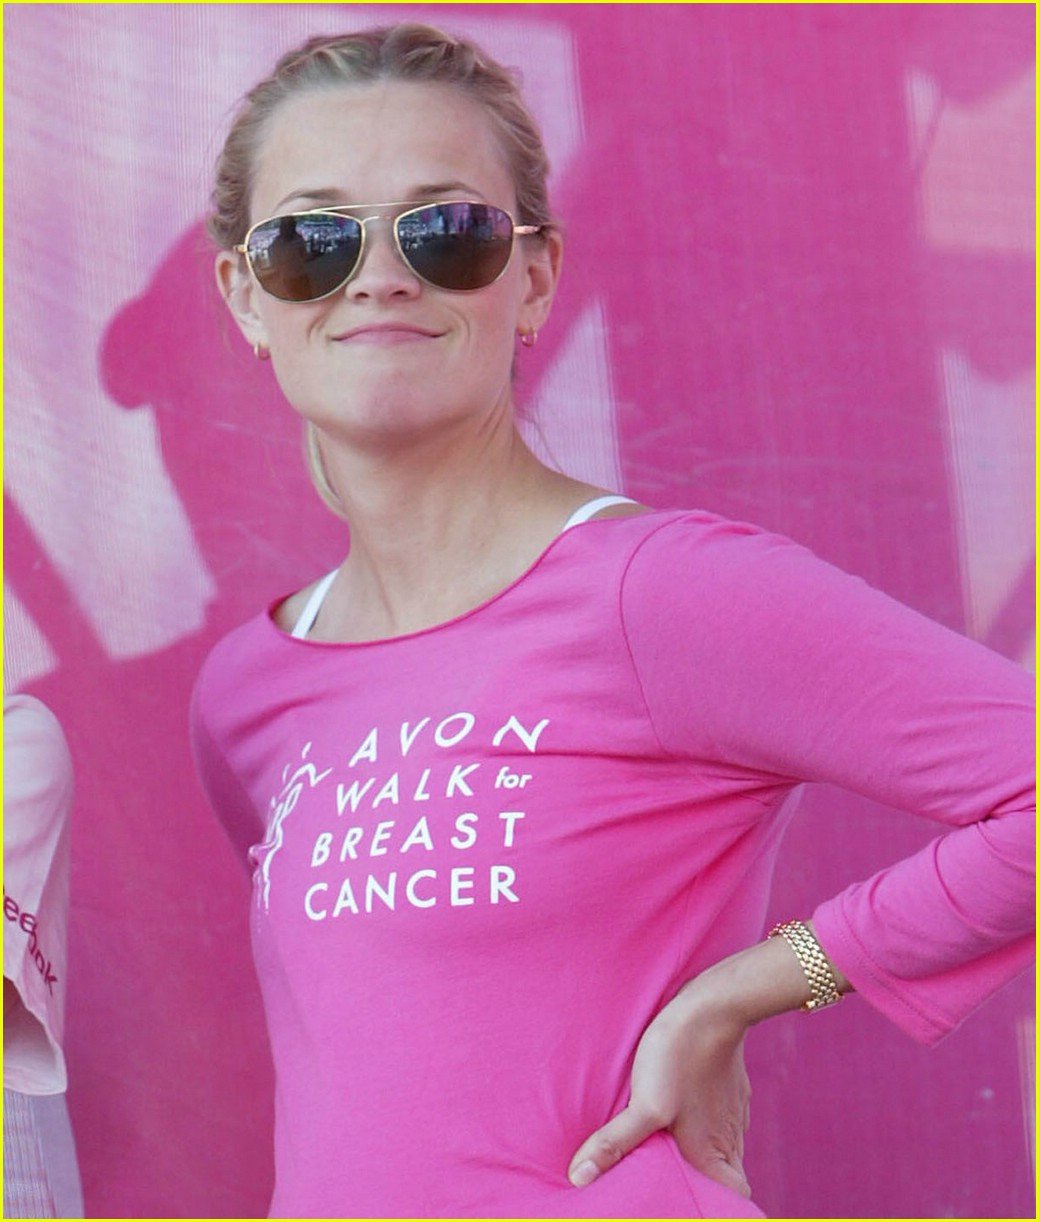 Reese Witherspoon Walks for Breast Cancer : Photo 1110891 | Reese Witherspoon Pictures ...